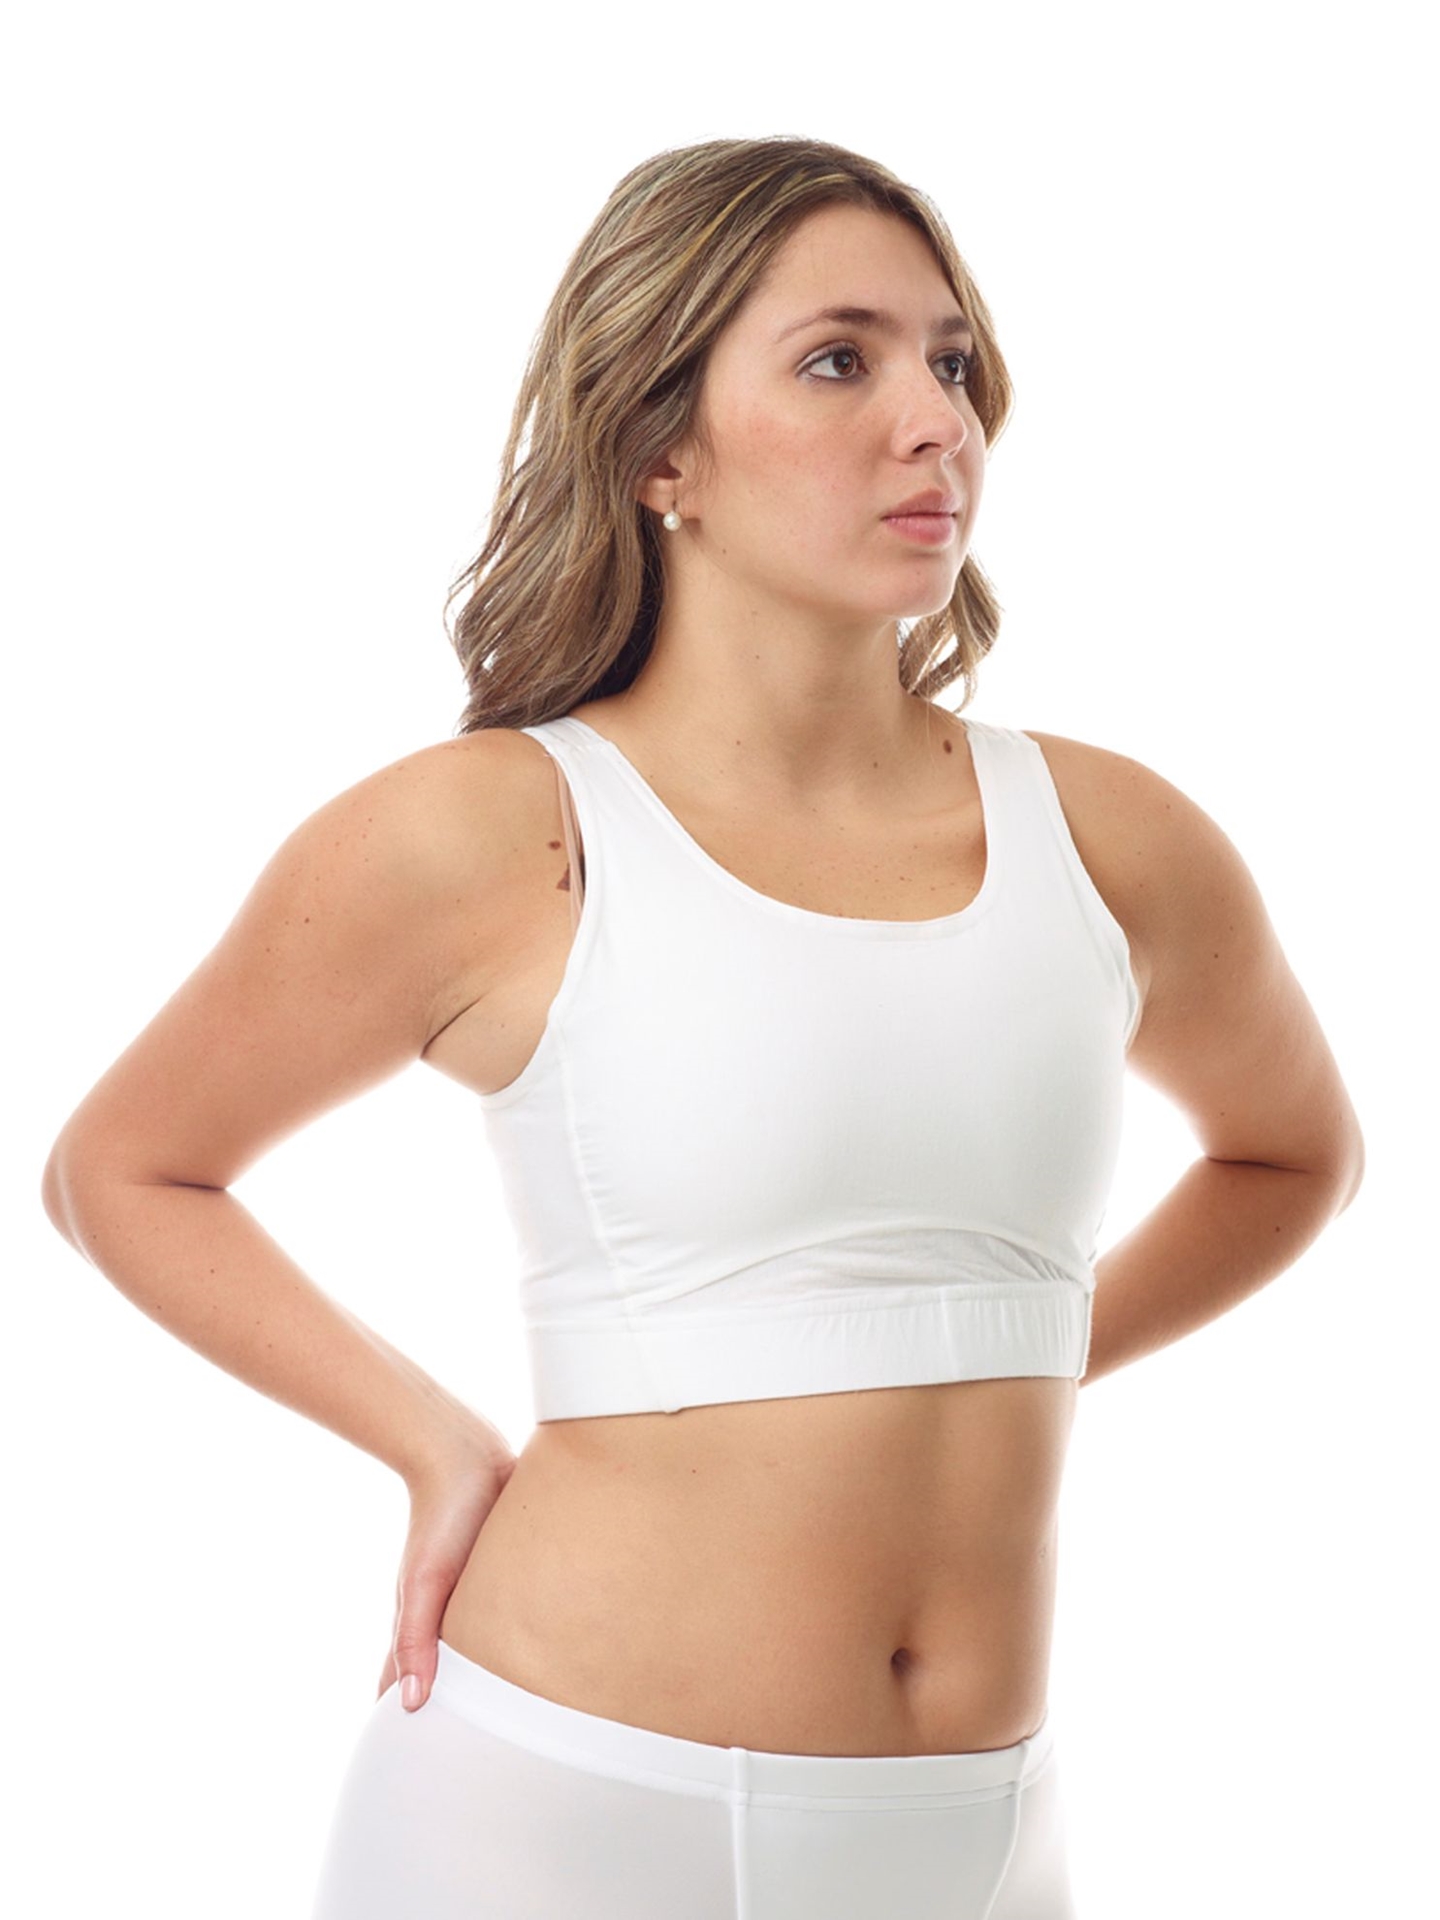 Sports bra designs provided to recruits during the fitting process.